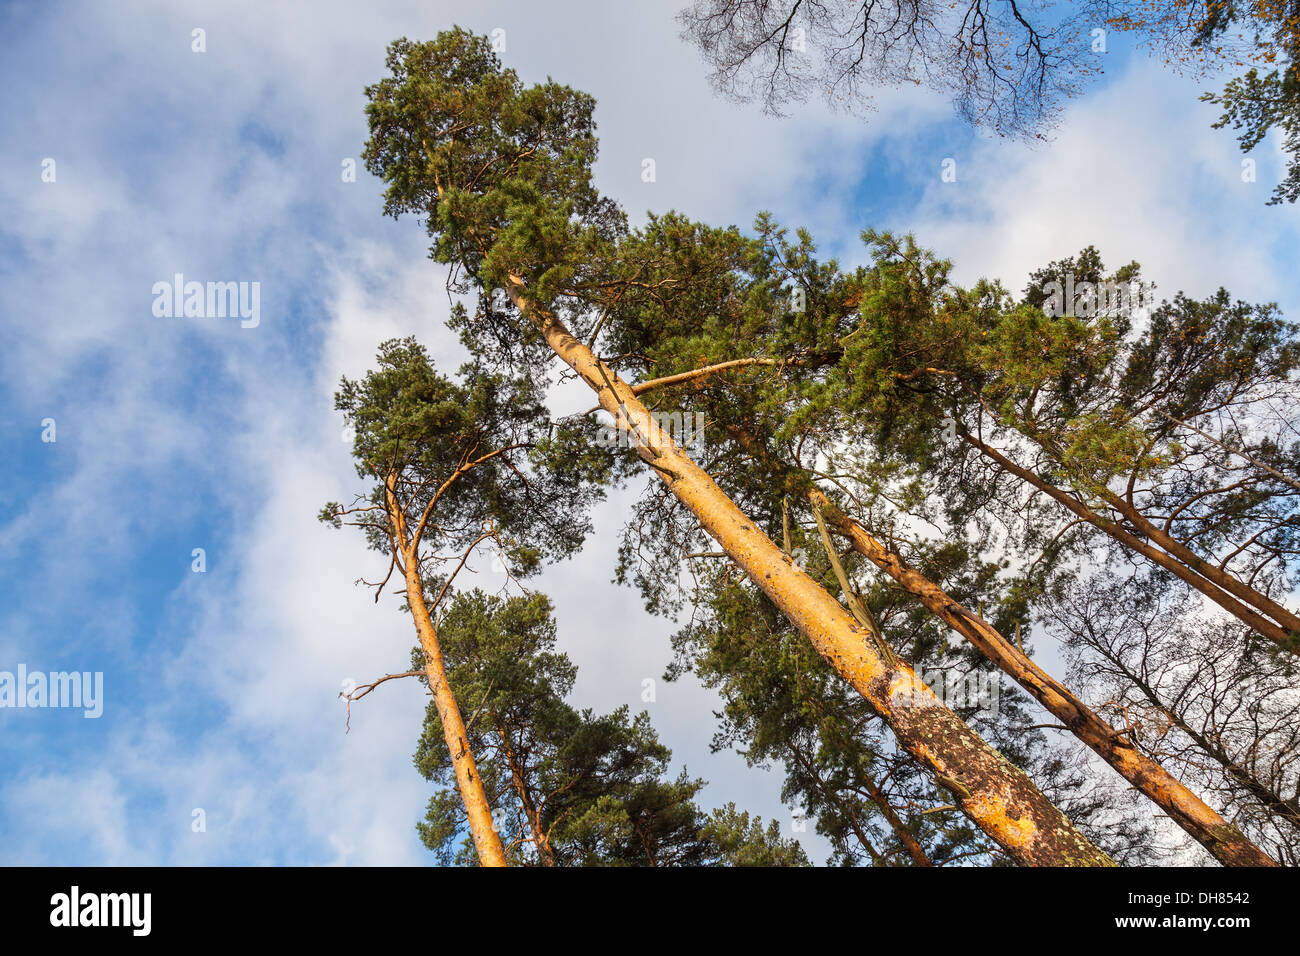 Tall wild pine trees above blue sky with clouds Stock Photo